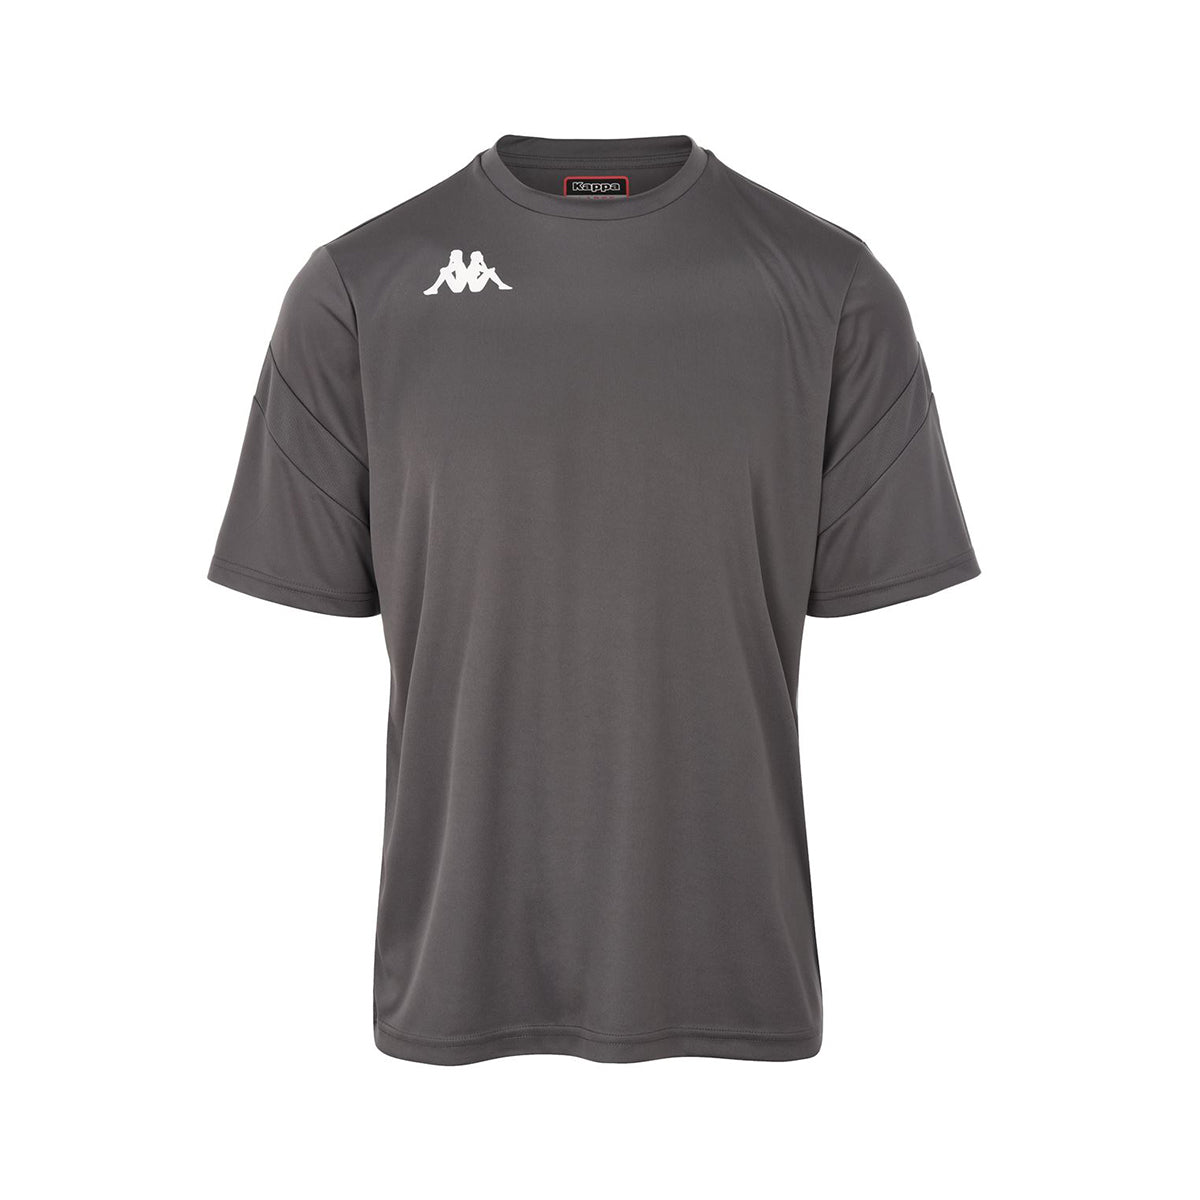 Maillot Dovo Gris Homme - Image 1